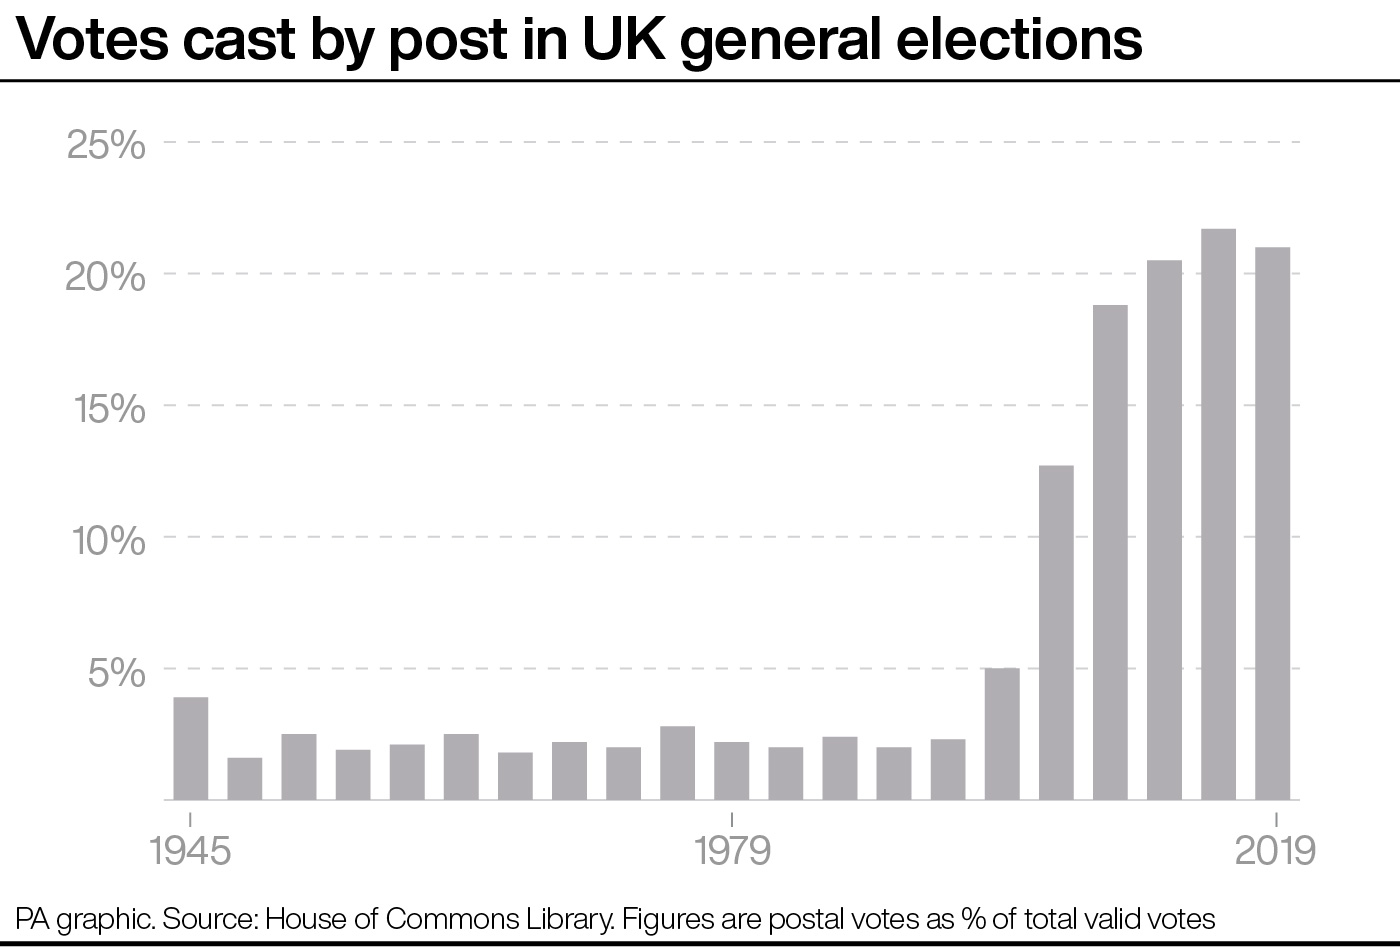 A chart showing the proportion of votes cast by post in UK general elections from 1945 to 2019